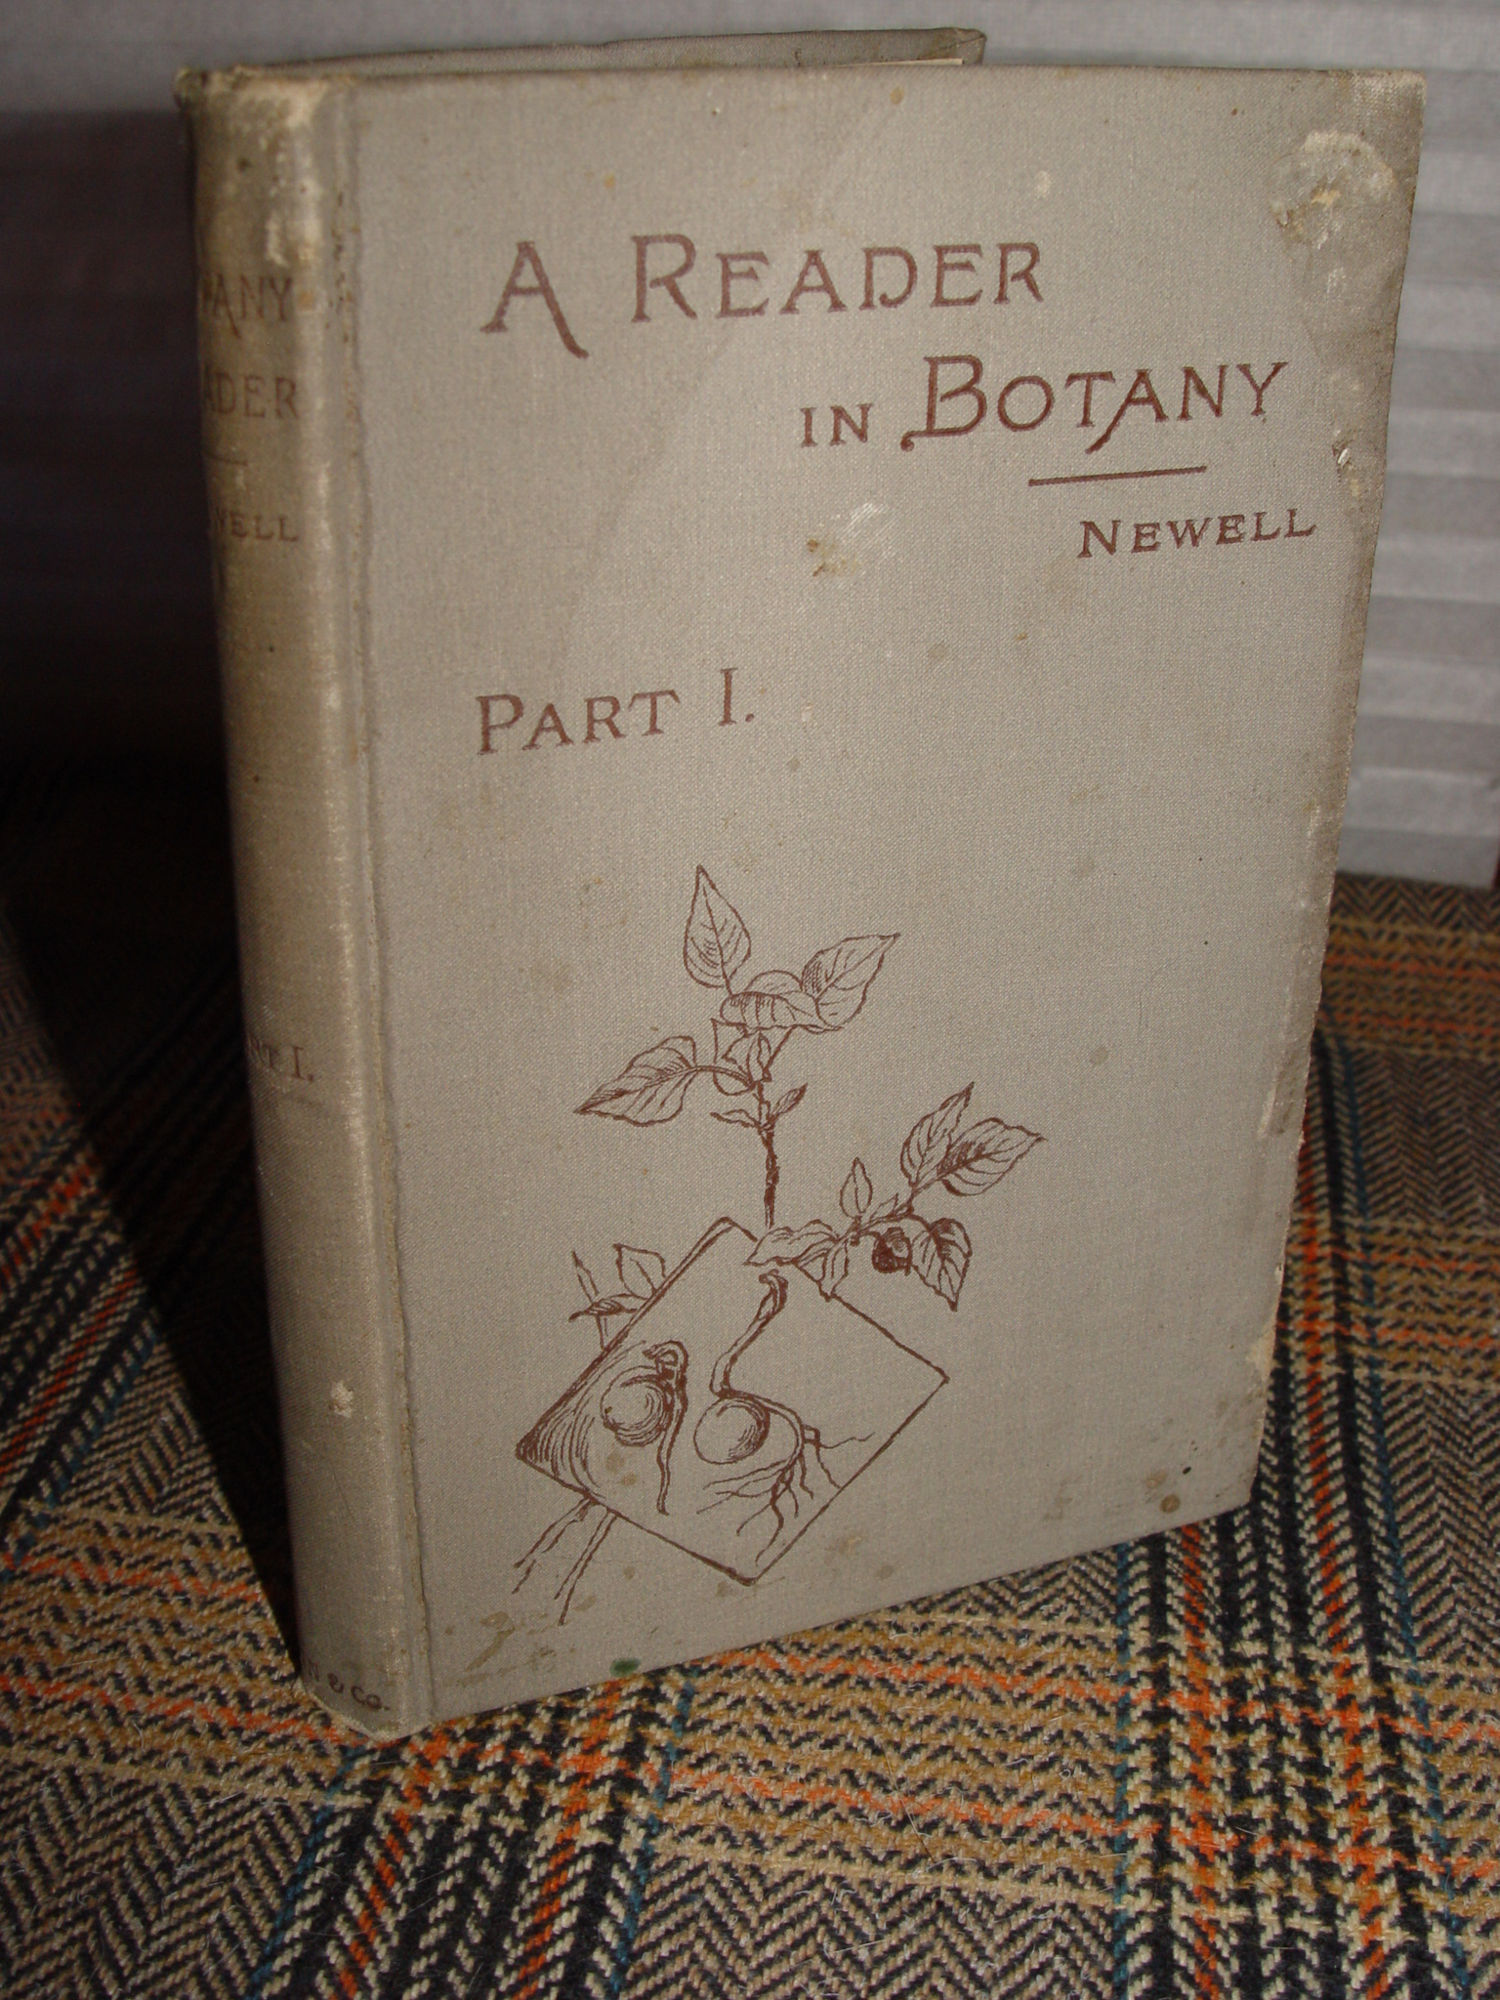 A Reader in Botany - Part I: From Seed to
                        Leaf 1894 by Jane H. Newell